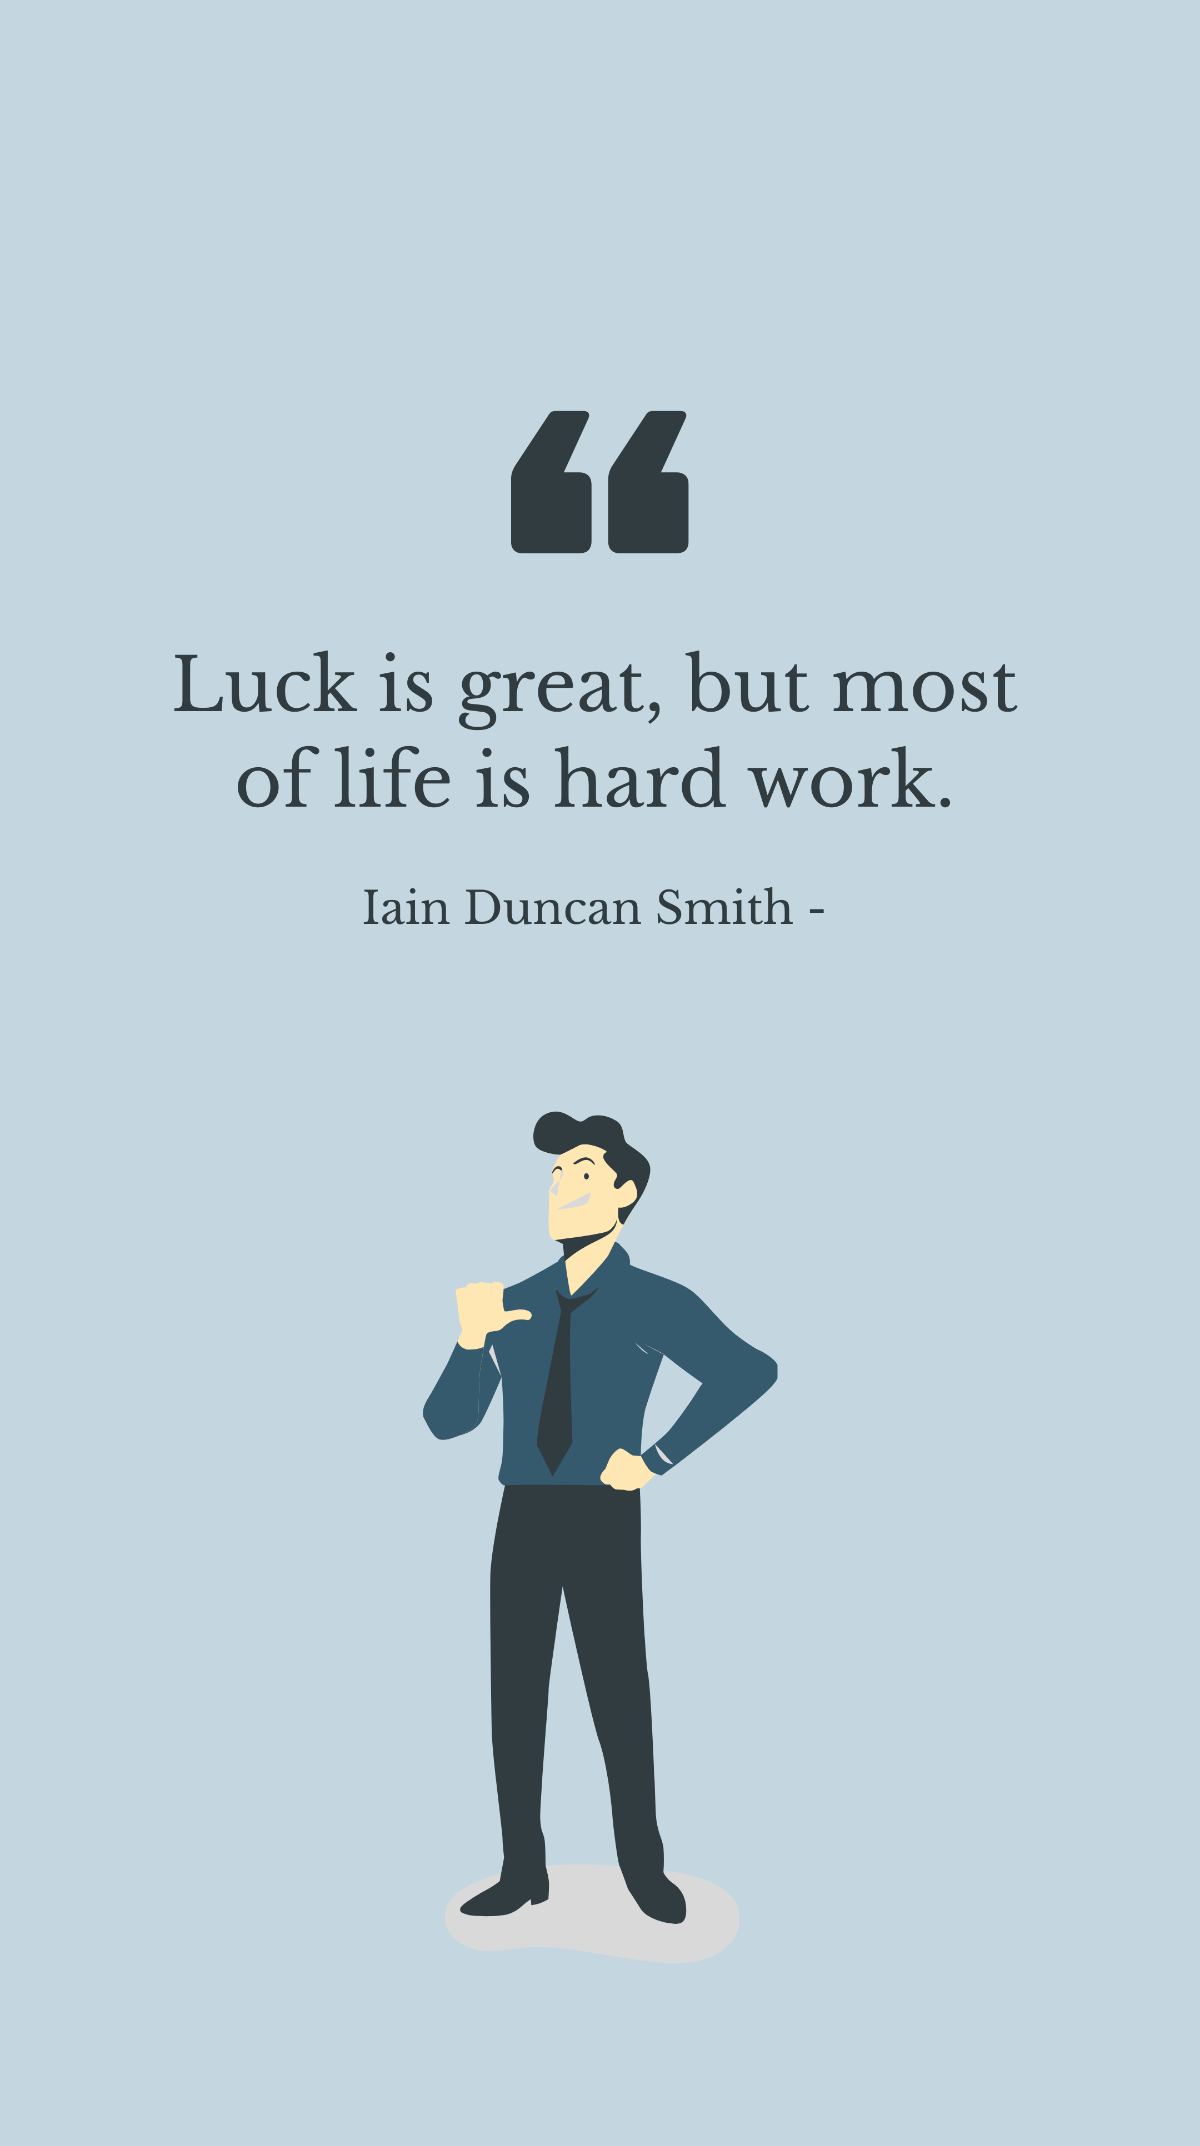 Free Iain Duncan Smith - Luck is great, but most of life is hard work. Template